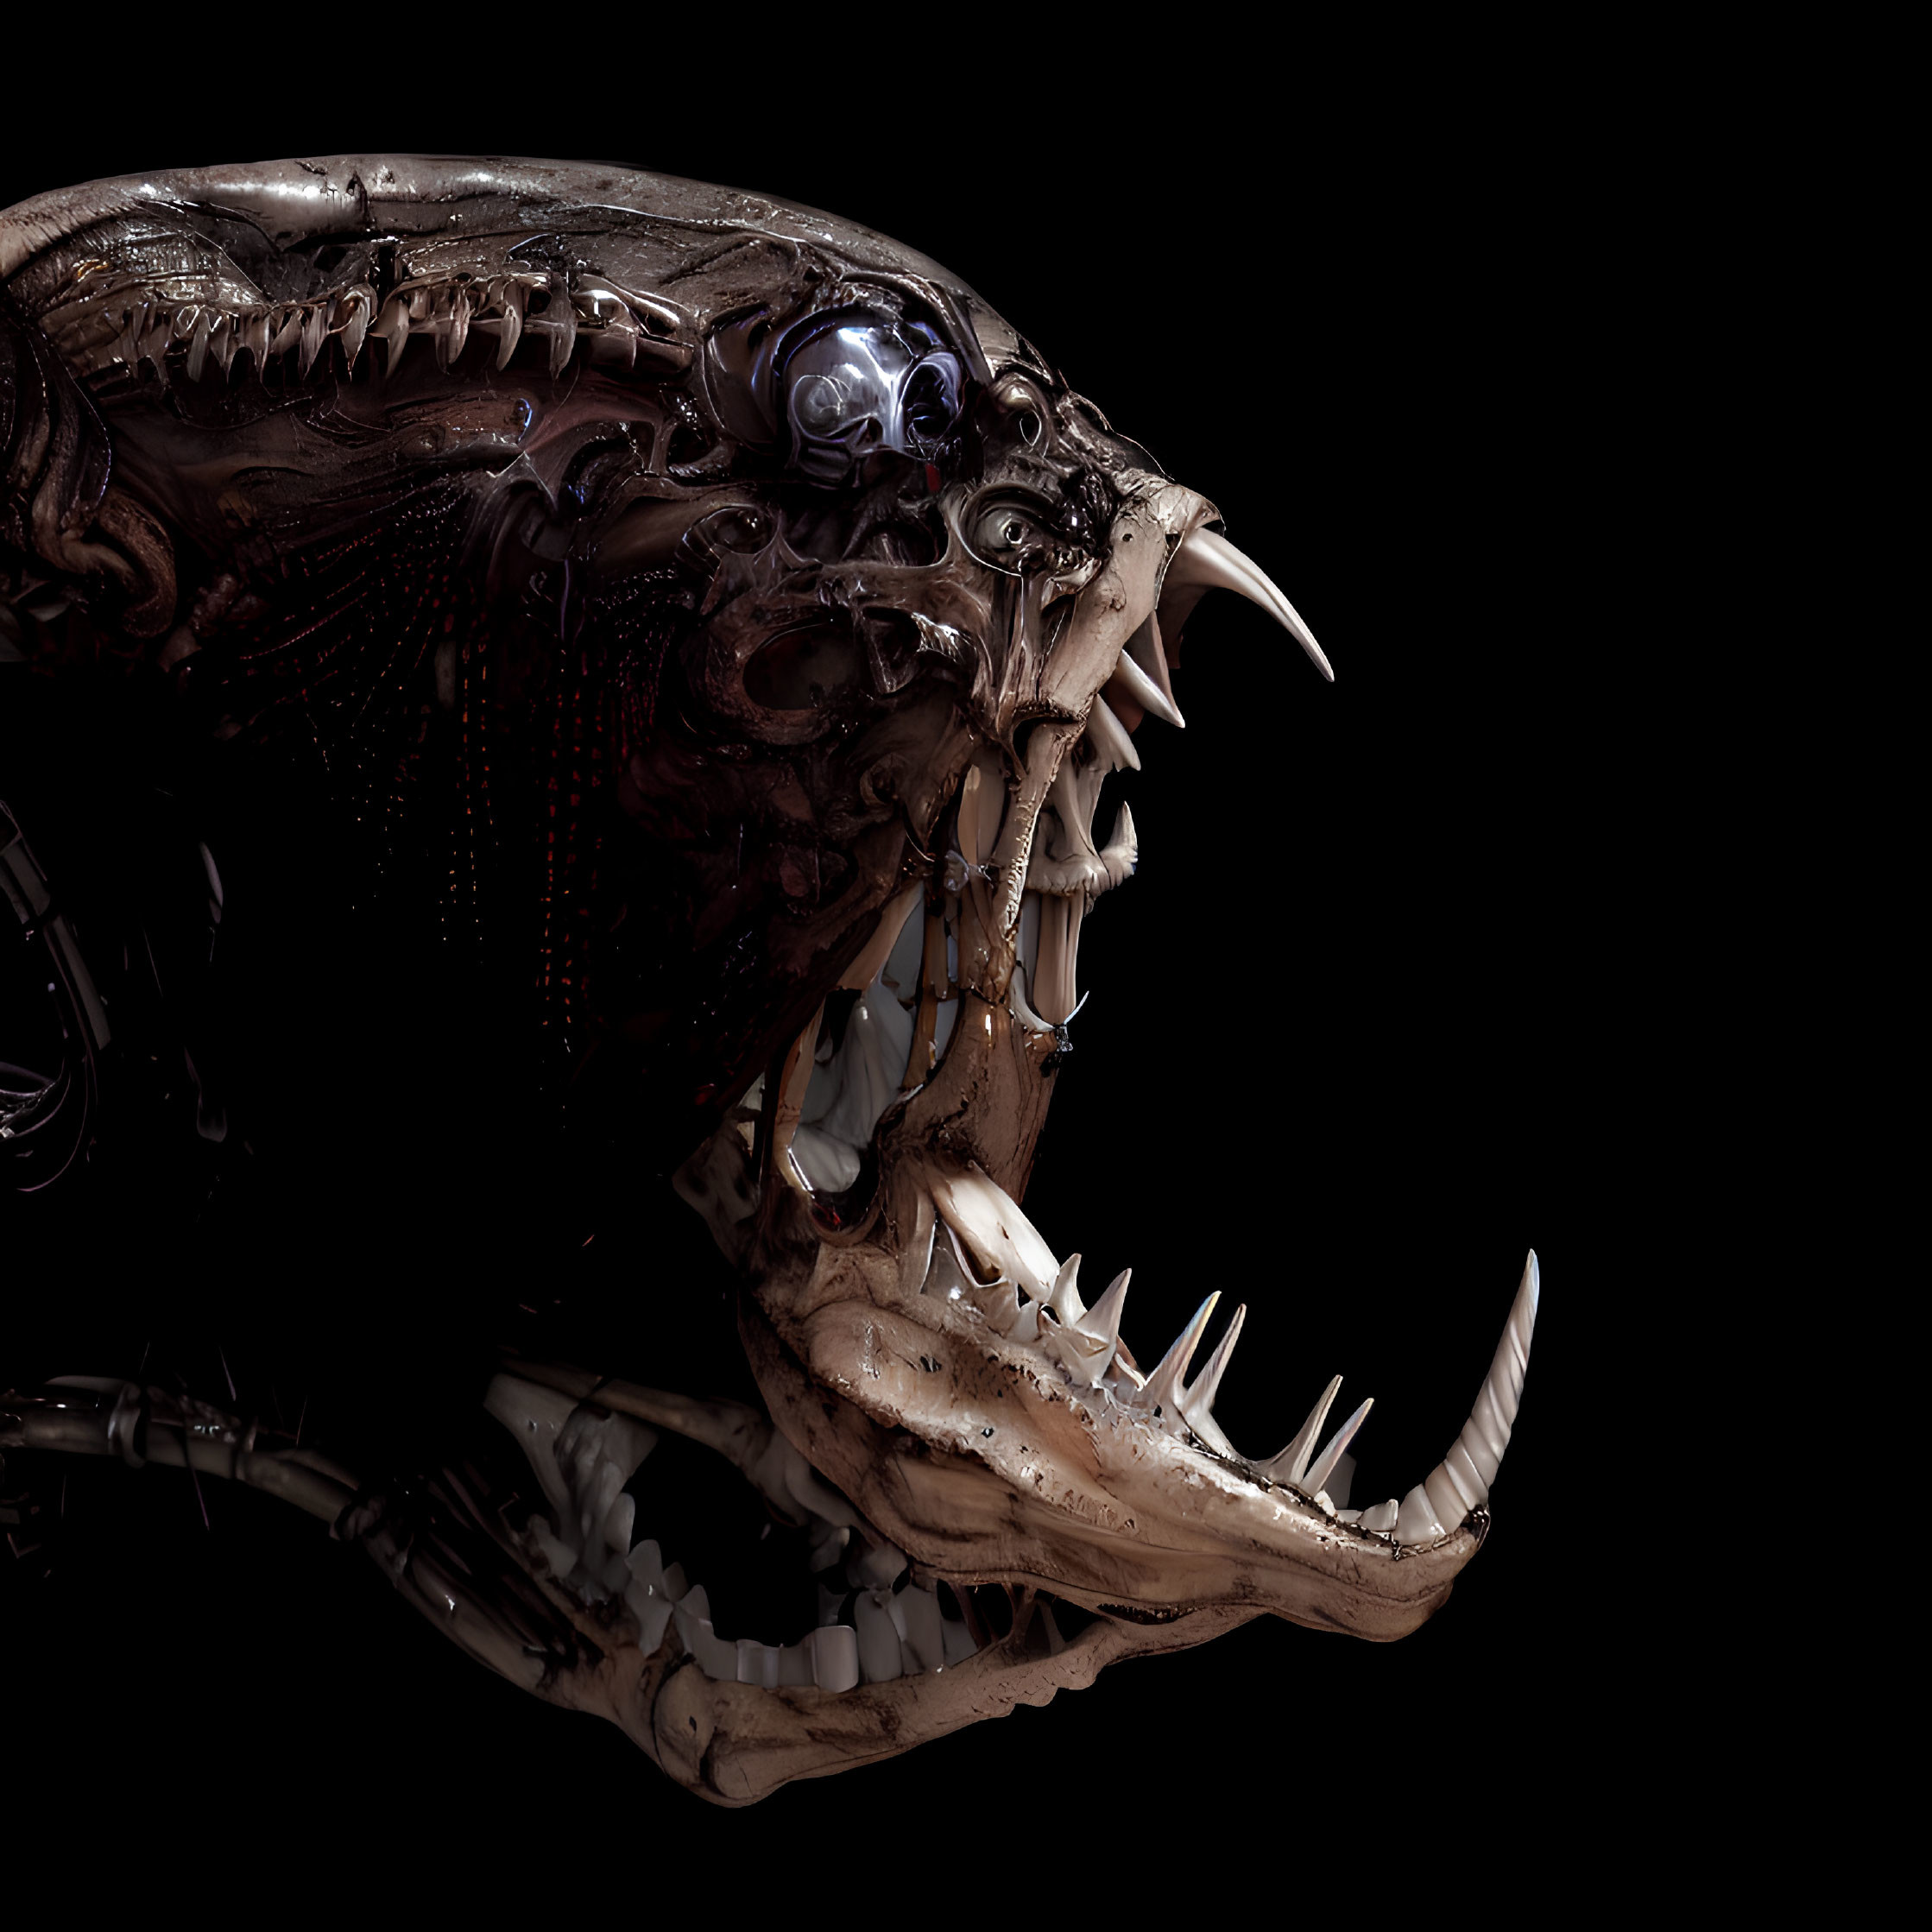 Detailed biomechanical creature with sharp teeth and metallic components on dark background